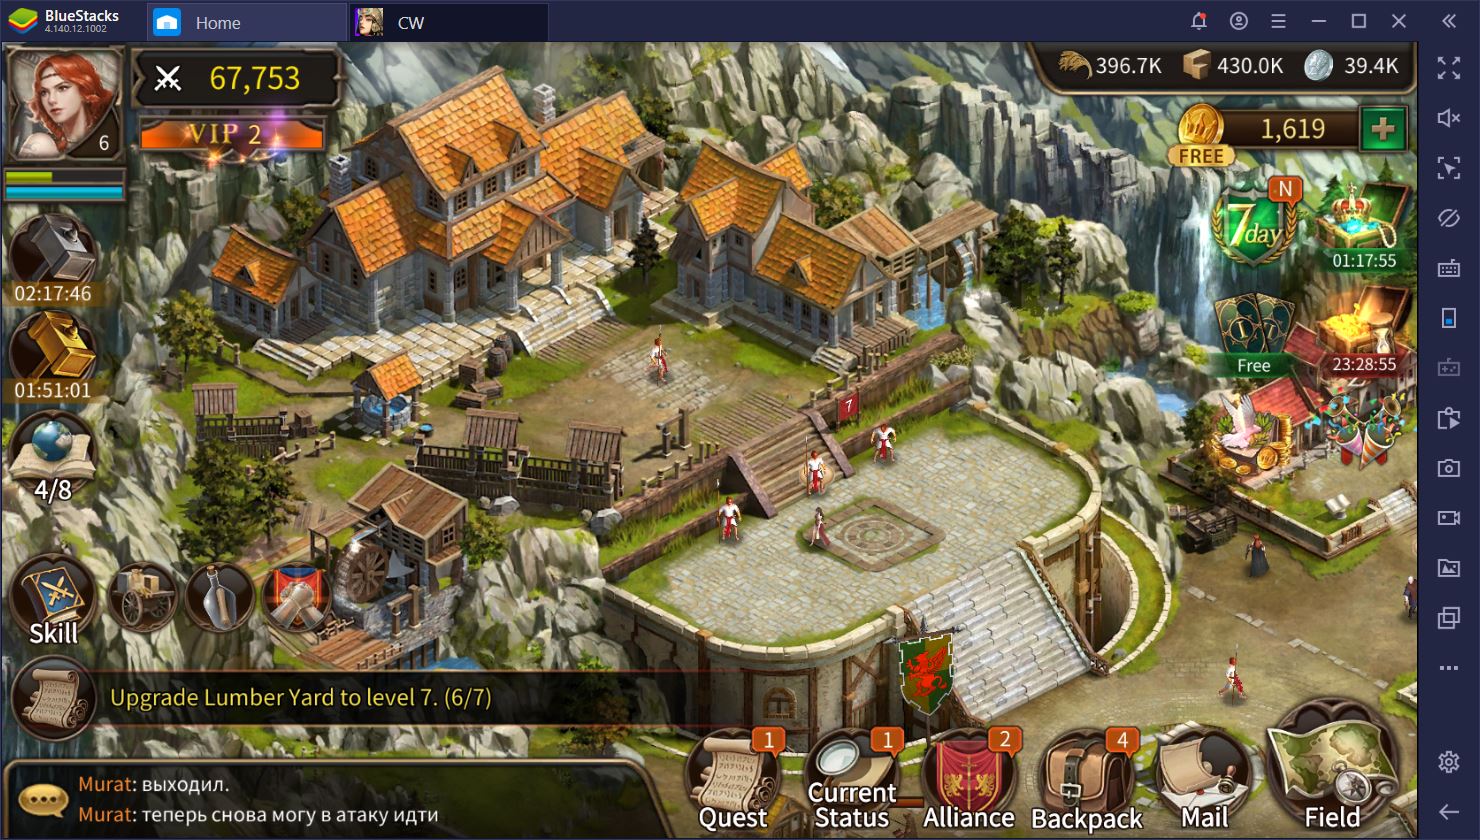 Civilization War on PC: Tips and Tricks to Become a Better Ruler